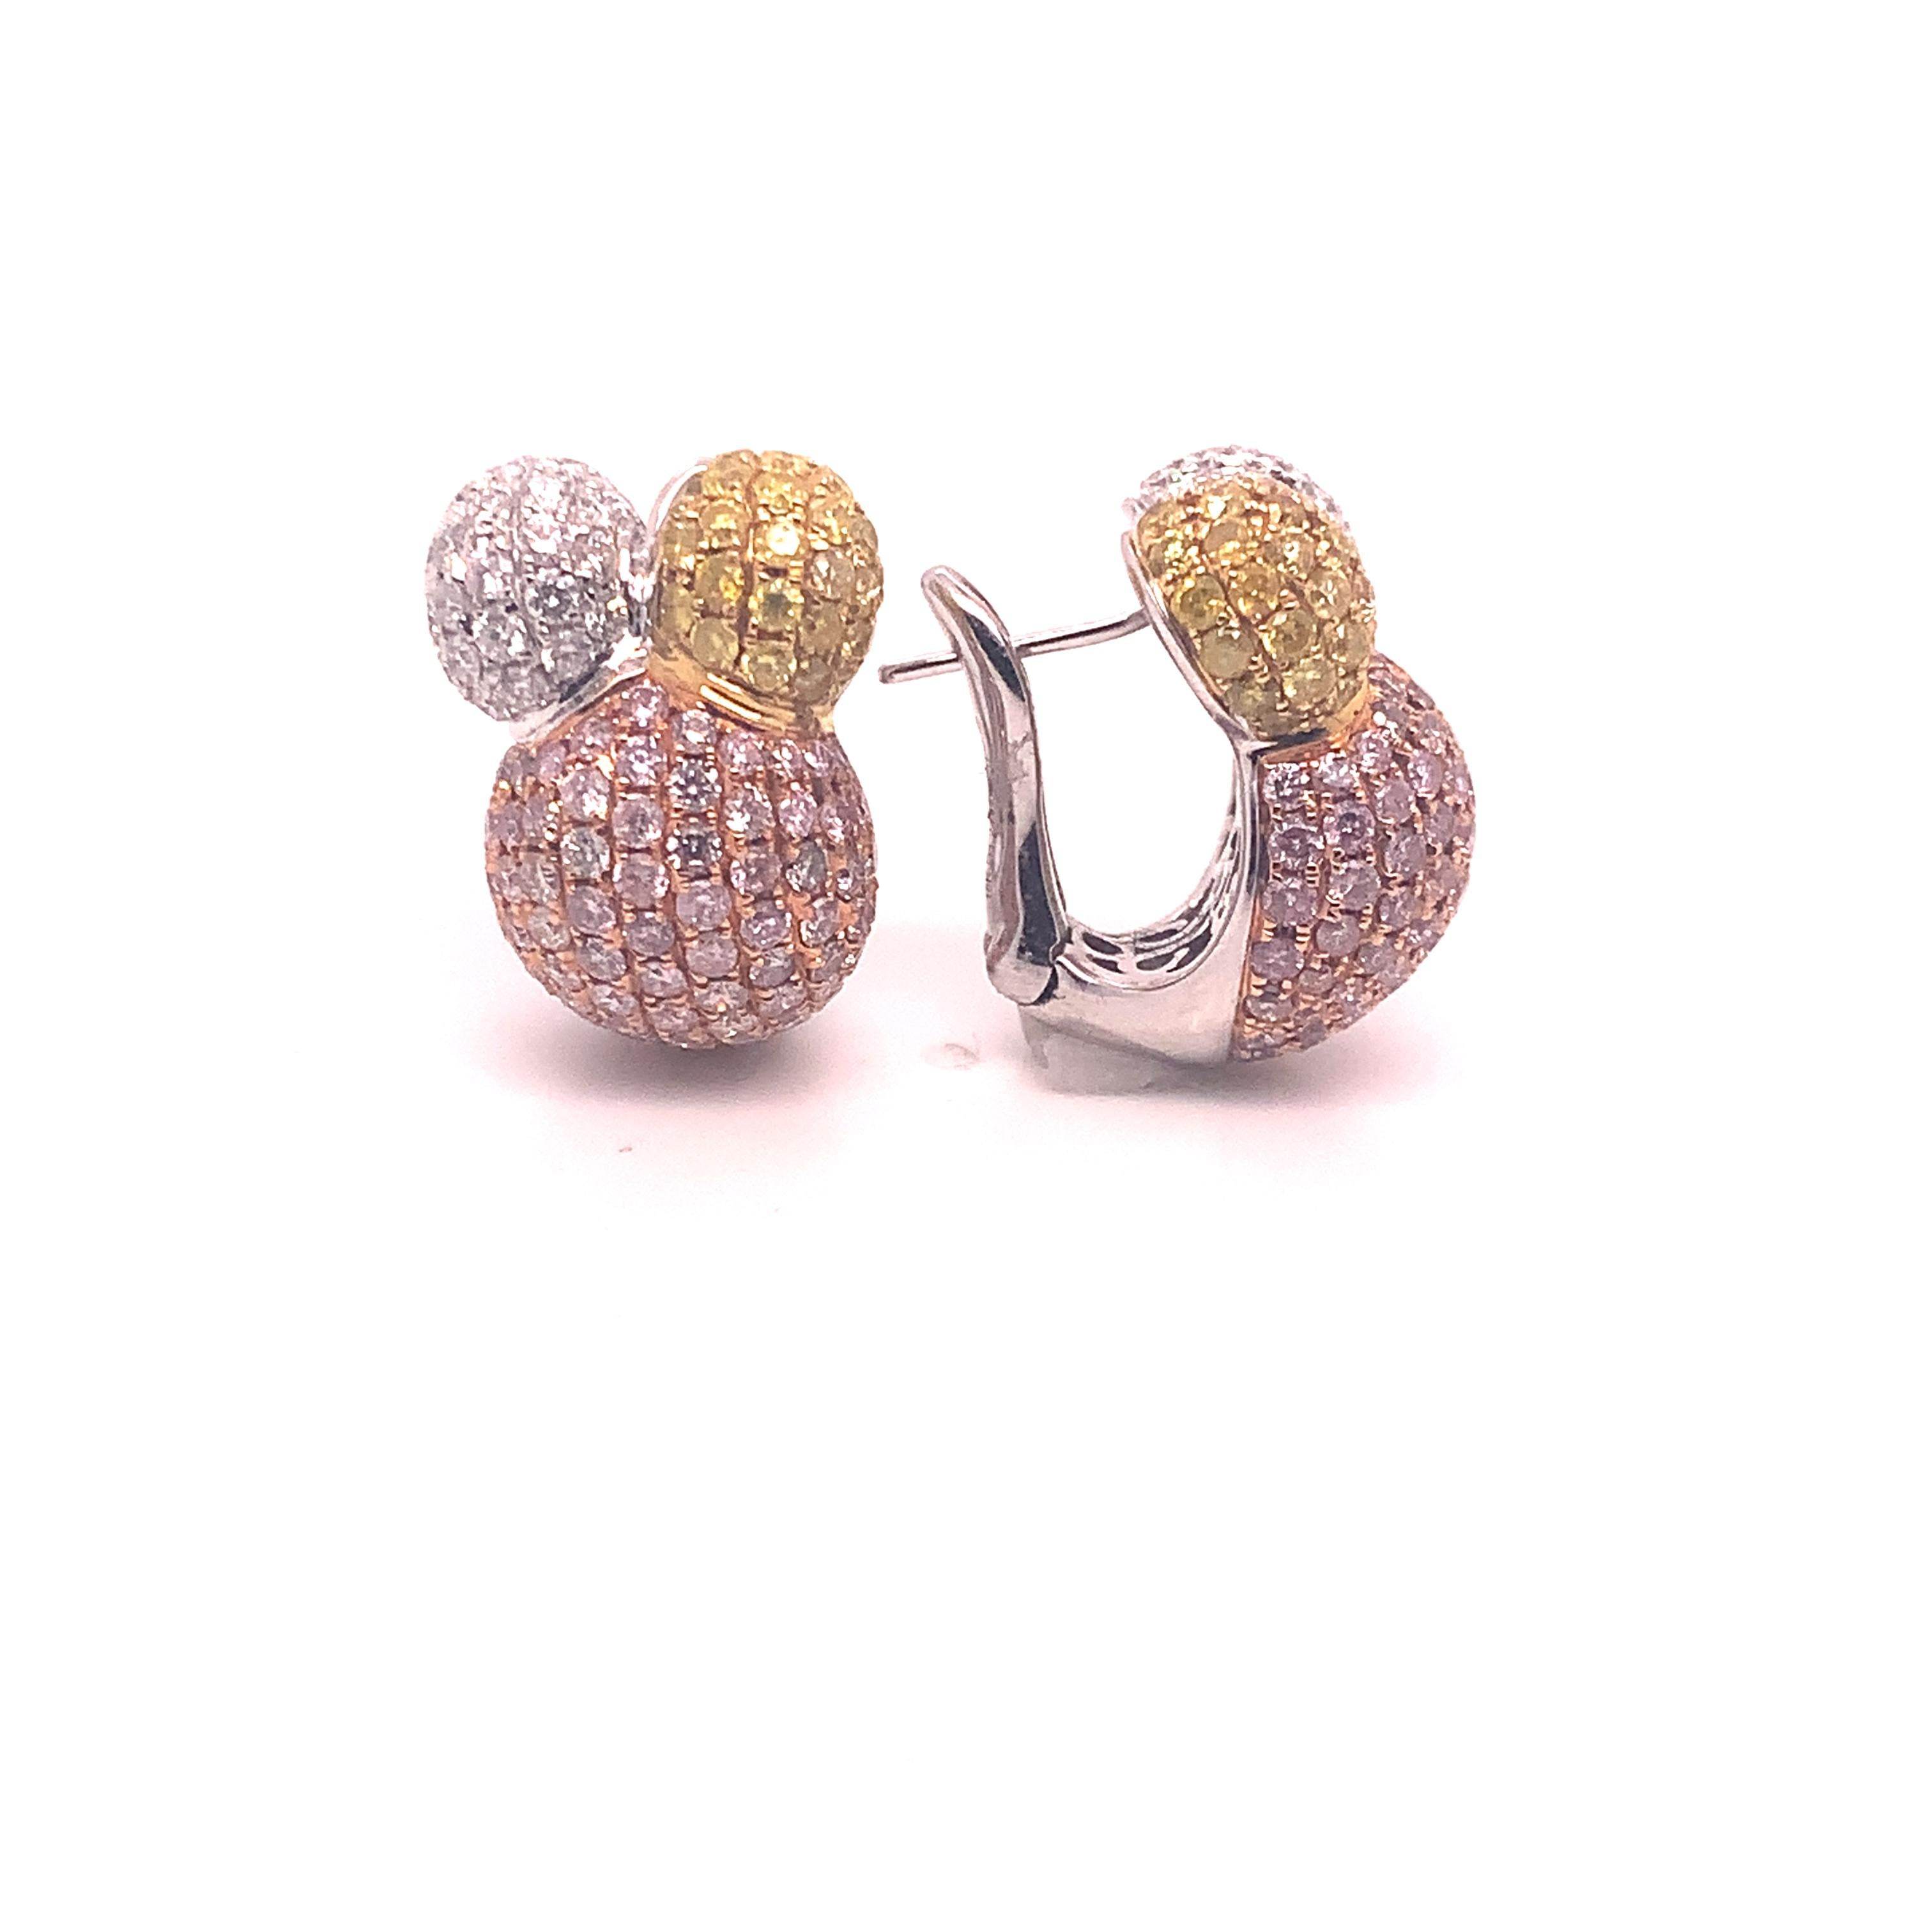 5.90 Carats of Sparkling Natural Fancy Colored Pink and Yellow Diamond Earrings
Total Diamond Weight: 5.90 Carat
Natural Fancy Pink Diamonds: 3.30 Carats (total 164 stones)
Natural Fancy Yellow Diamonds: 1.36 Carats (total 58 stones)
White Diamonds: